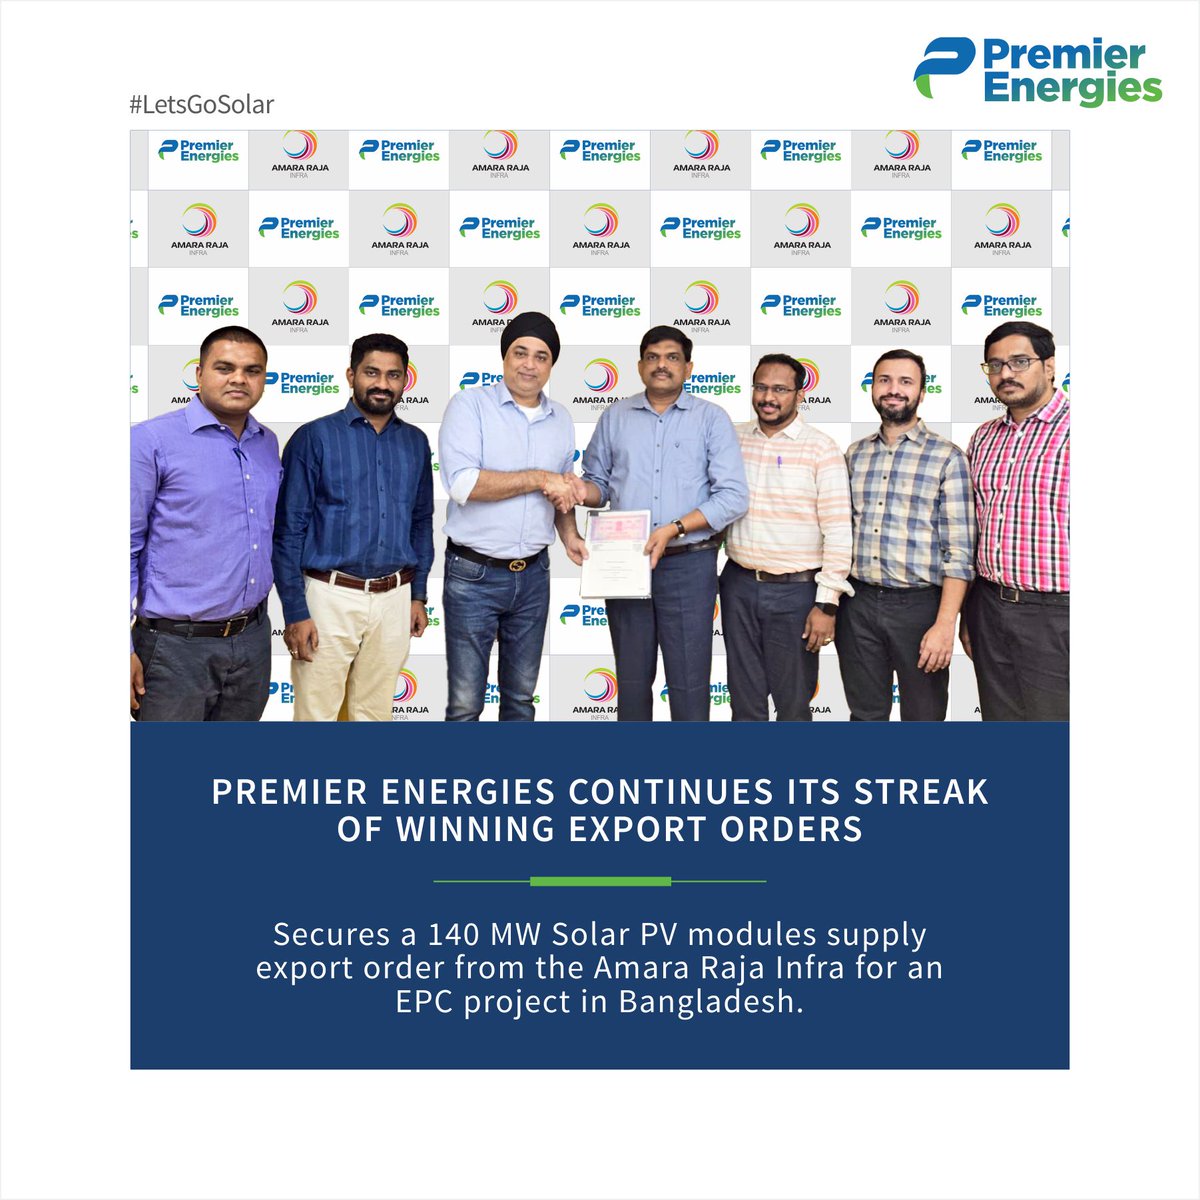 Premier Energies has achieved yet another significant milestone by securing a 140 megawatt (MW) Monofacial Solar PV Modules supply export order from the Amara Raja Infra for an EPC project in Bangladesh.

#SolarEnergy #SolarModules #RenewableEnergy #PremierEnergies #LetsGoSolar